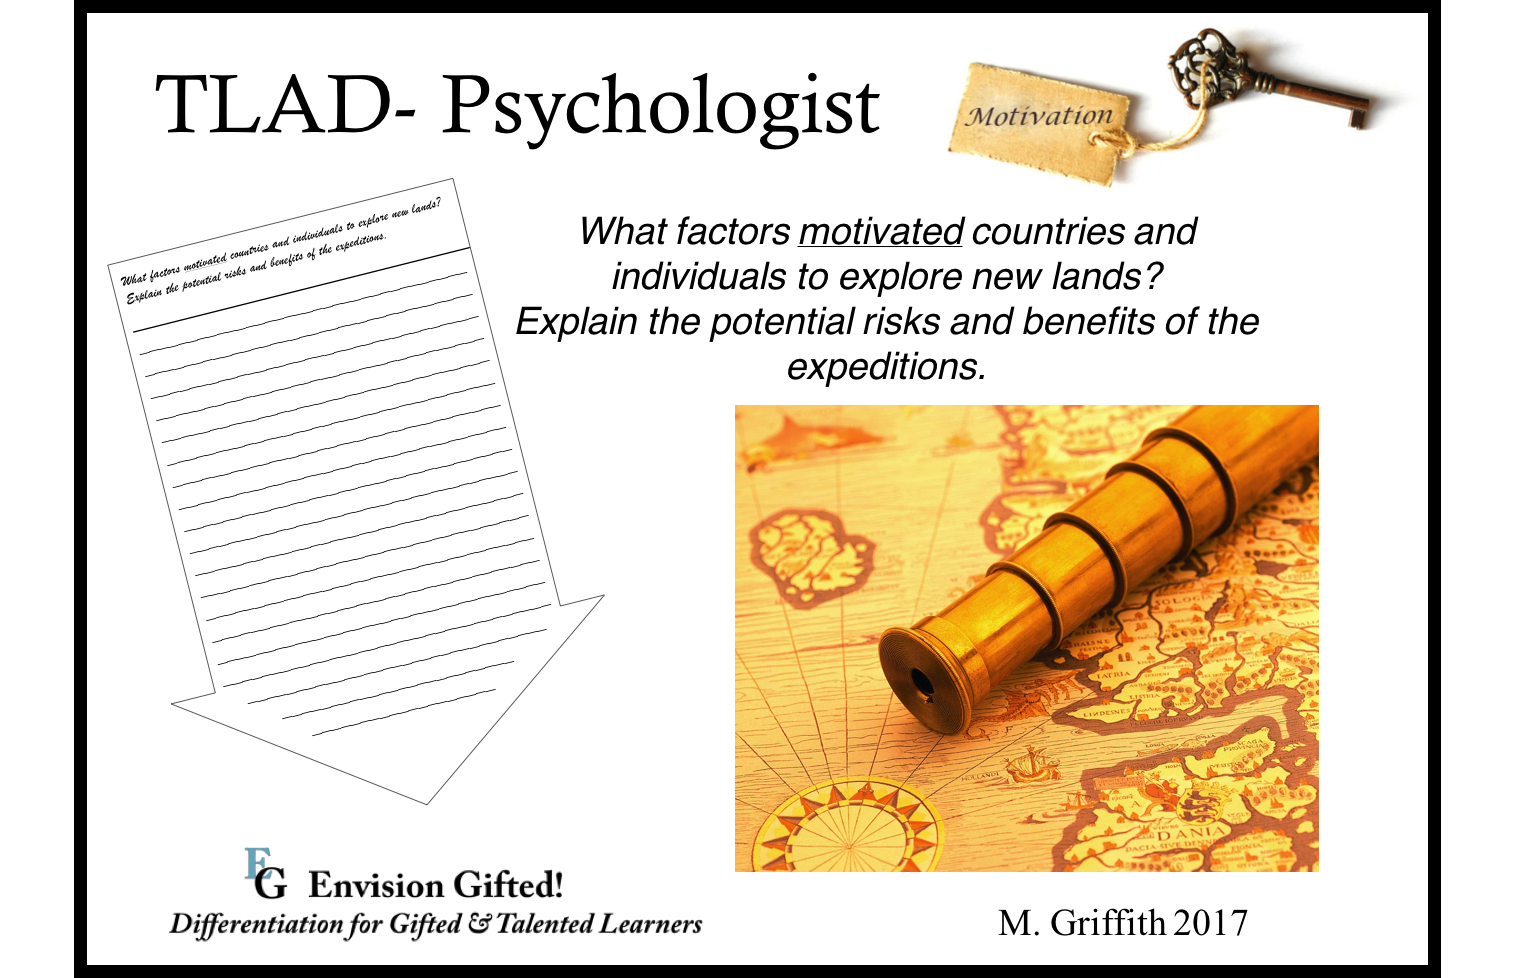 Envision Gifted. TLAD Psychologist Exploration